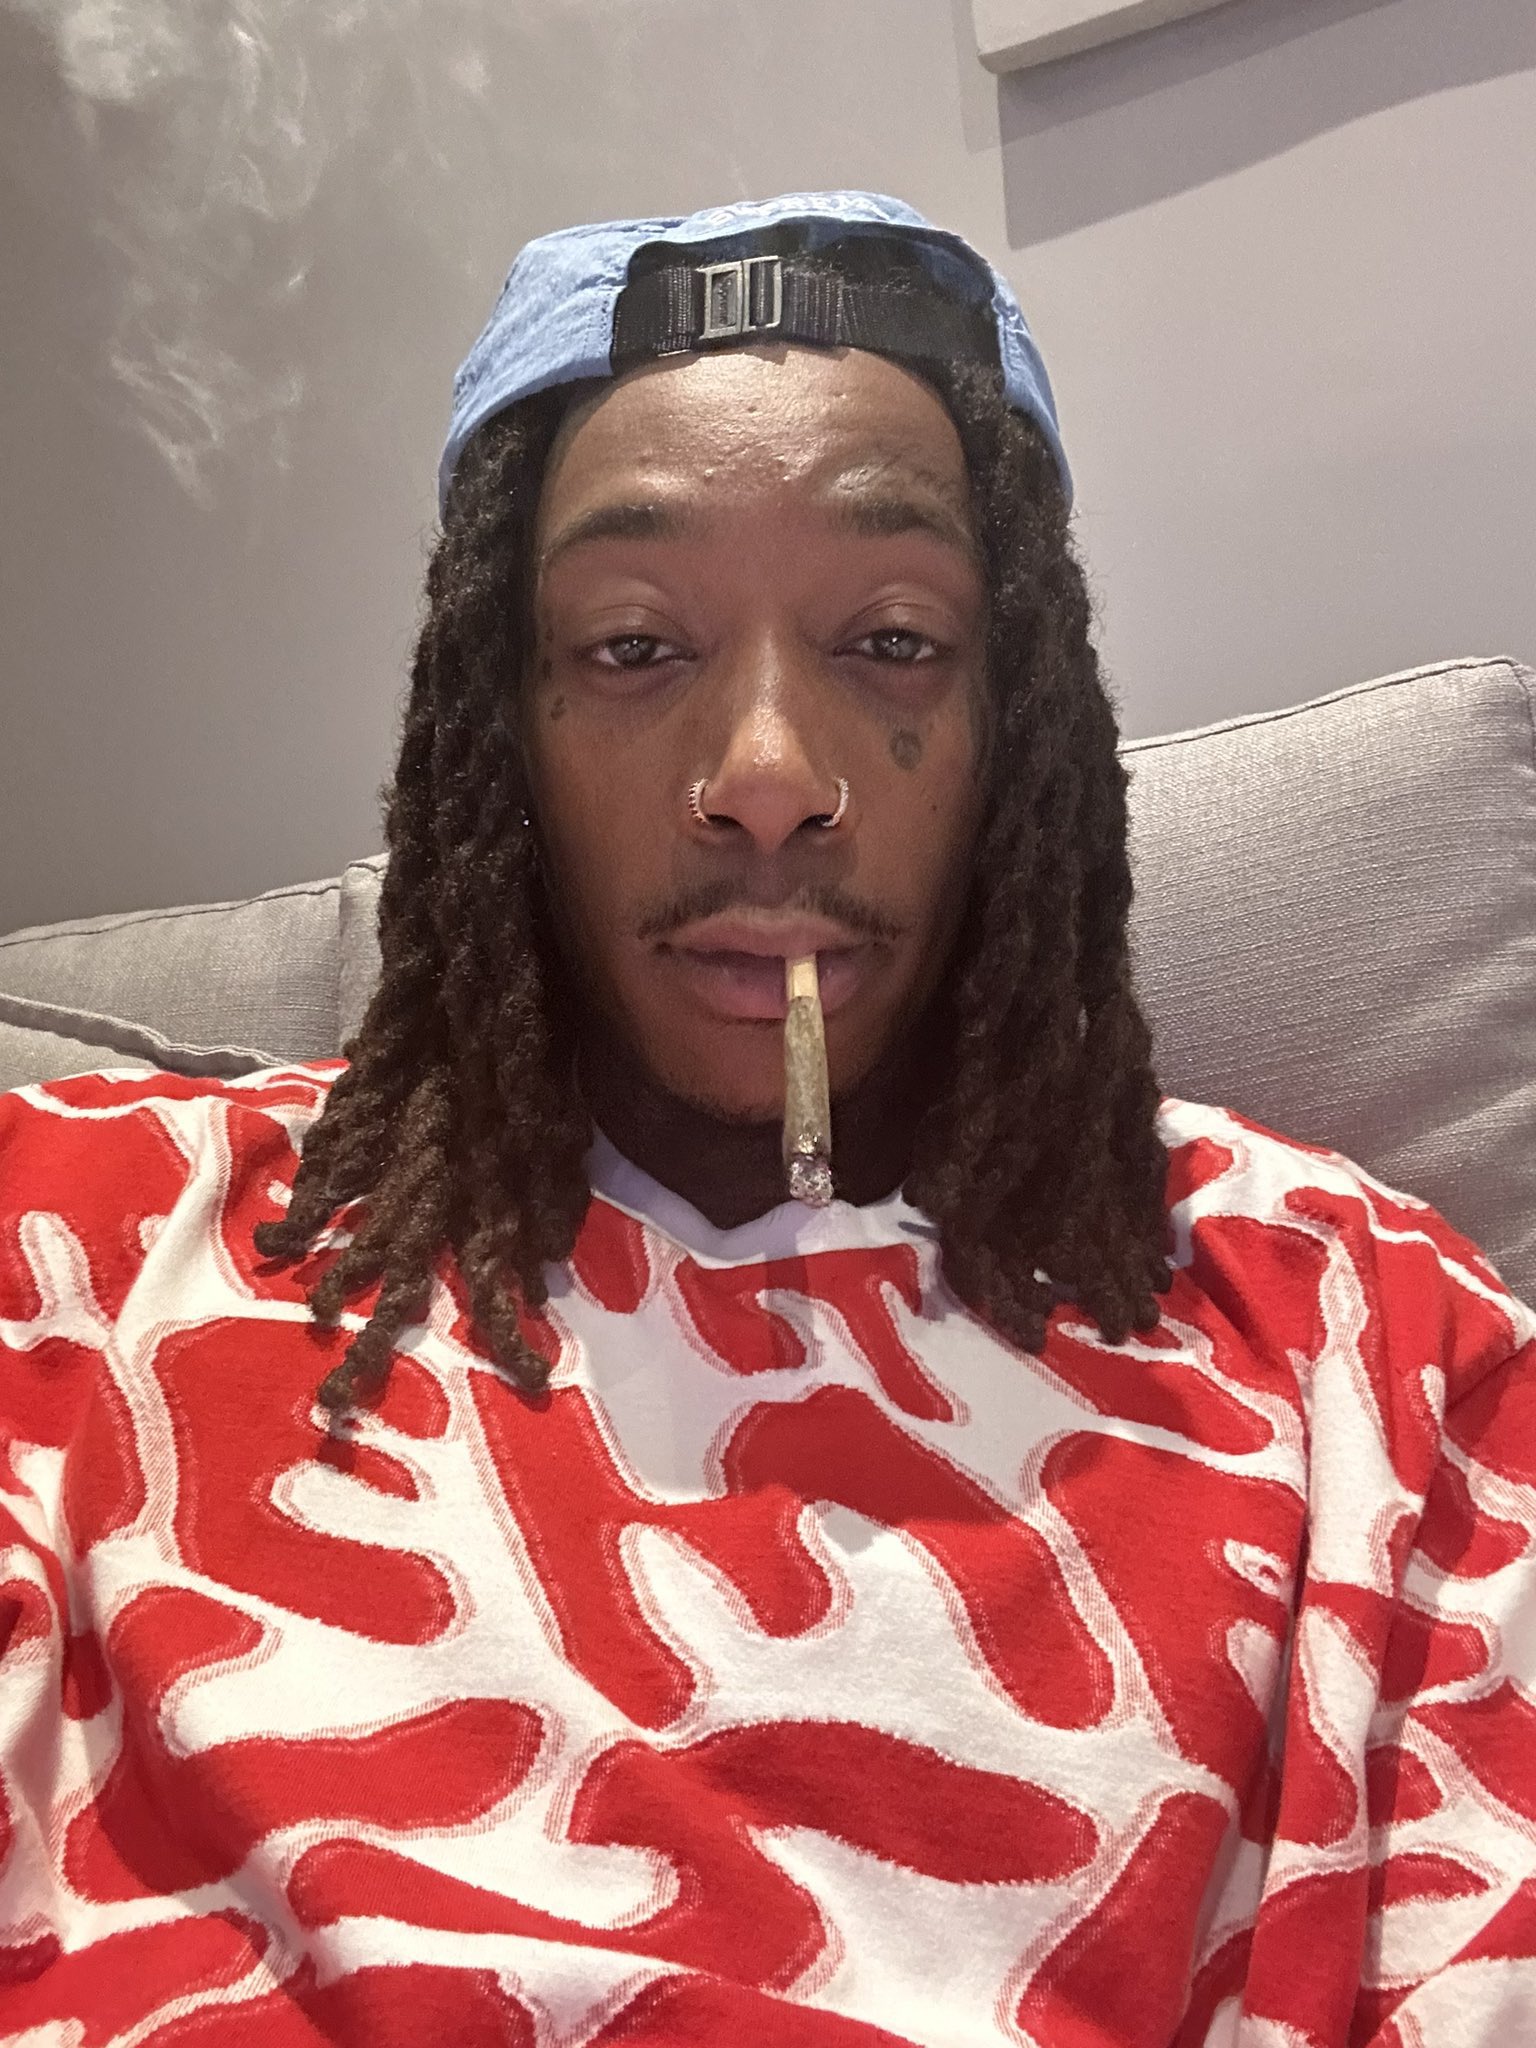 Wiz Khalifa makes headlines as he sells a portion of his music catalog, including hit songs like 'Black & Yellow' and 'See You Again'.